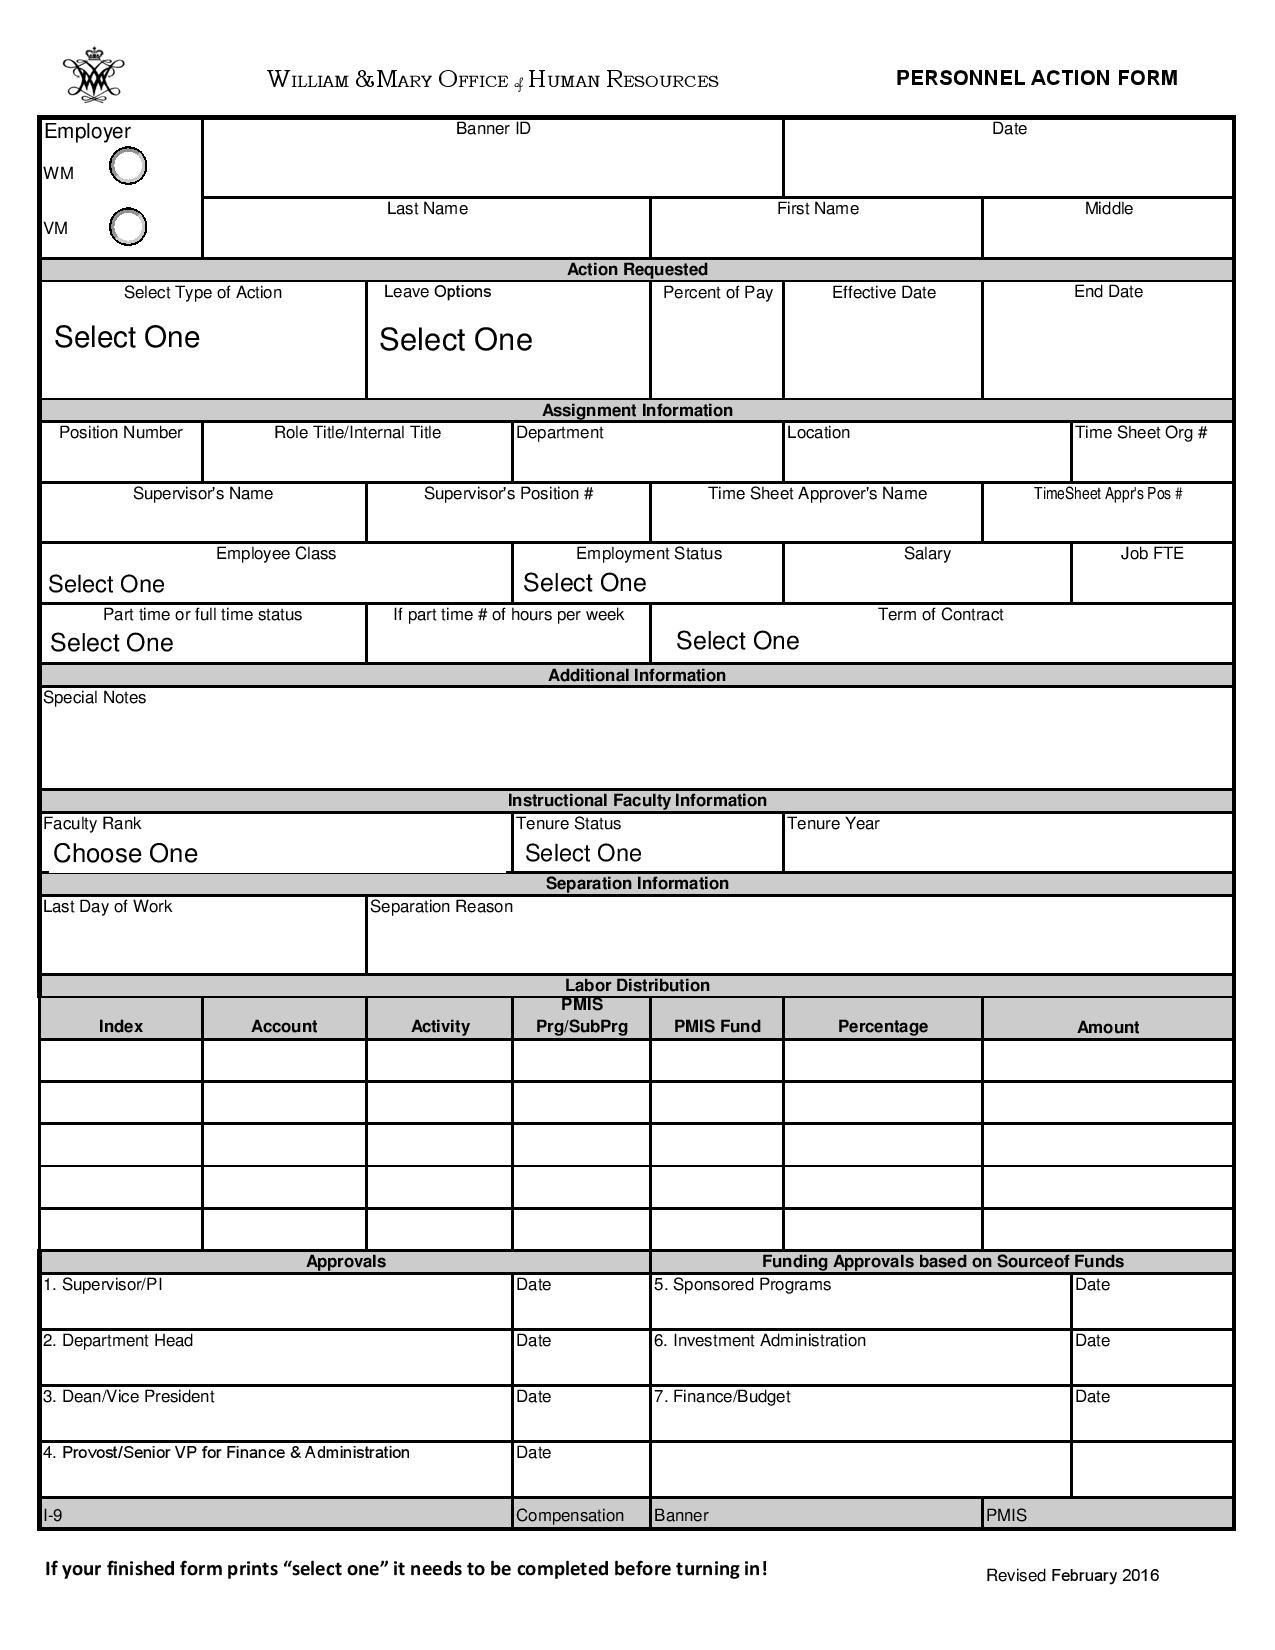 revised personnel action form page 0011